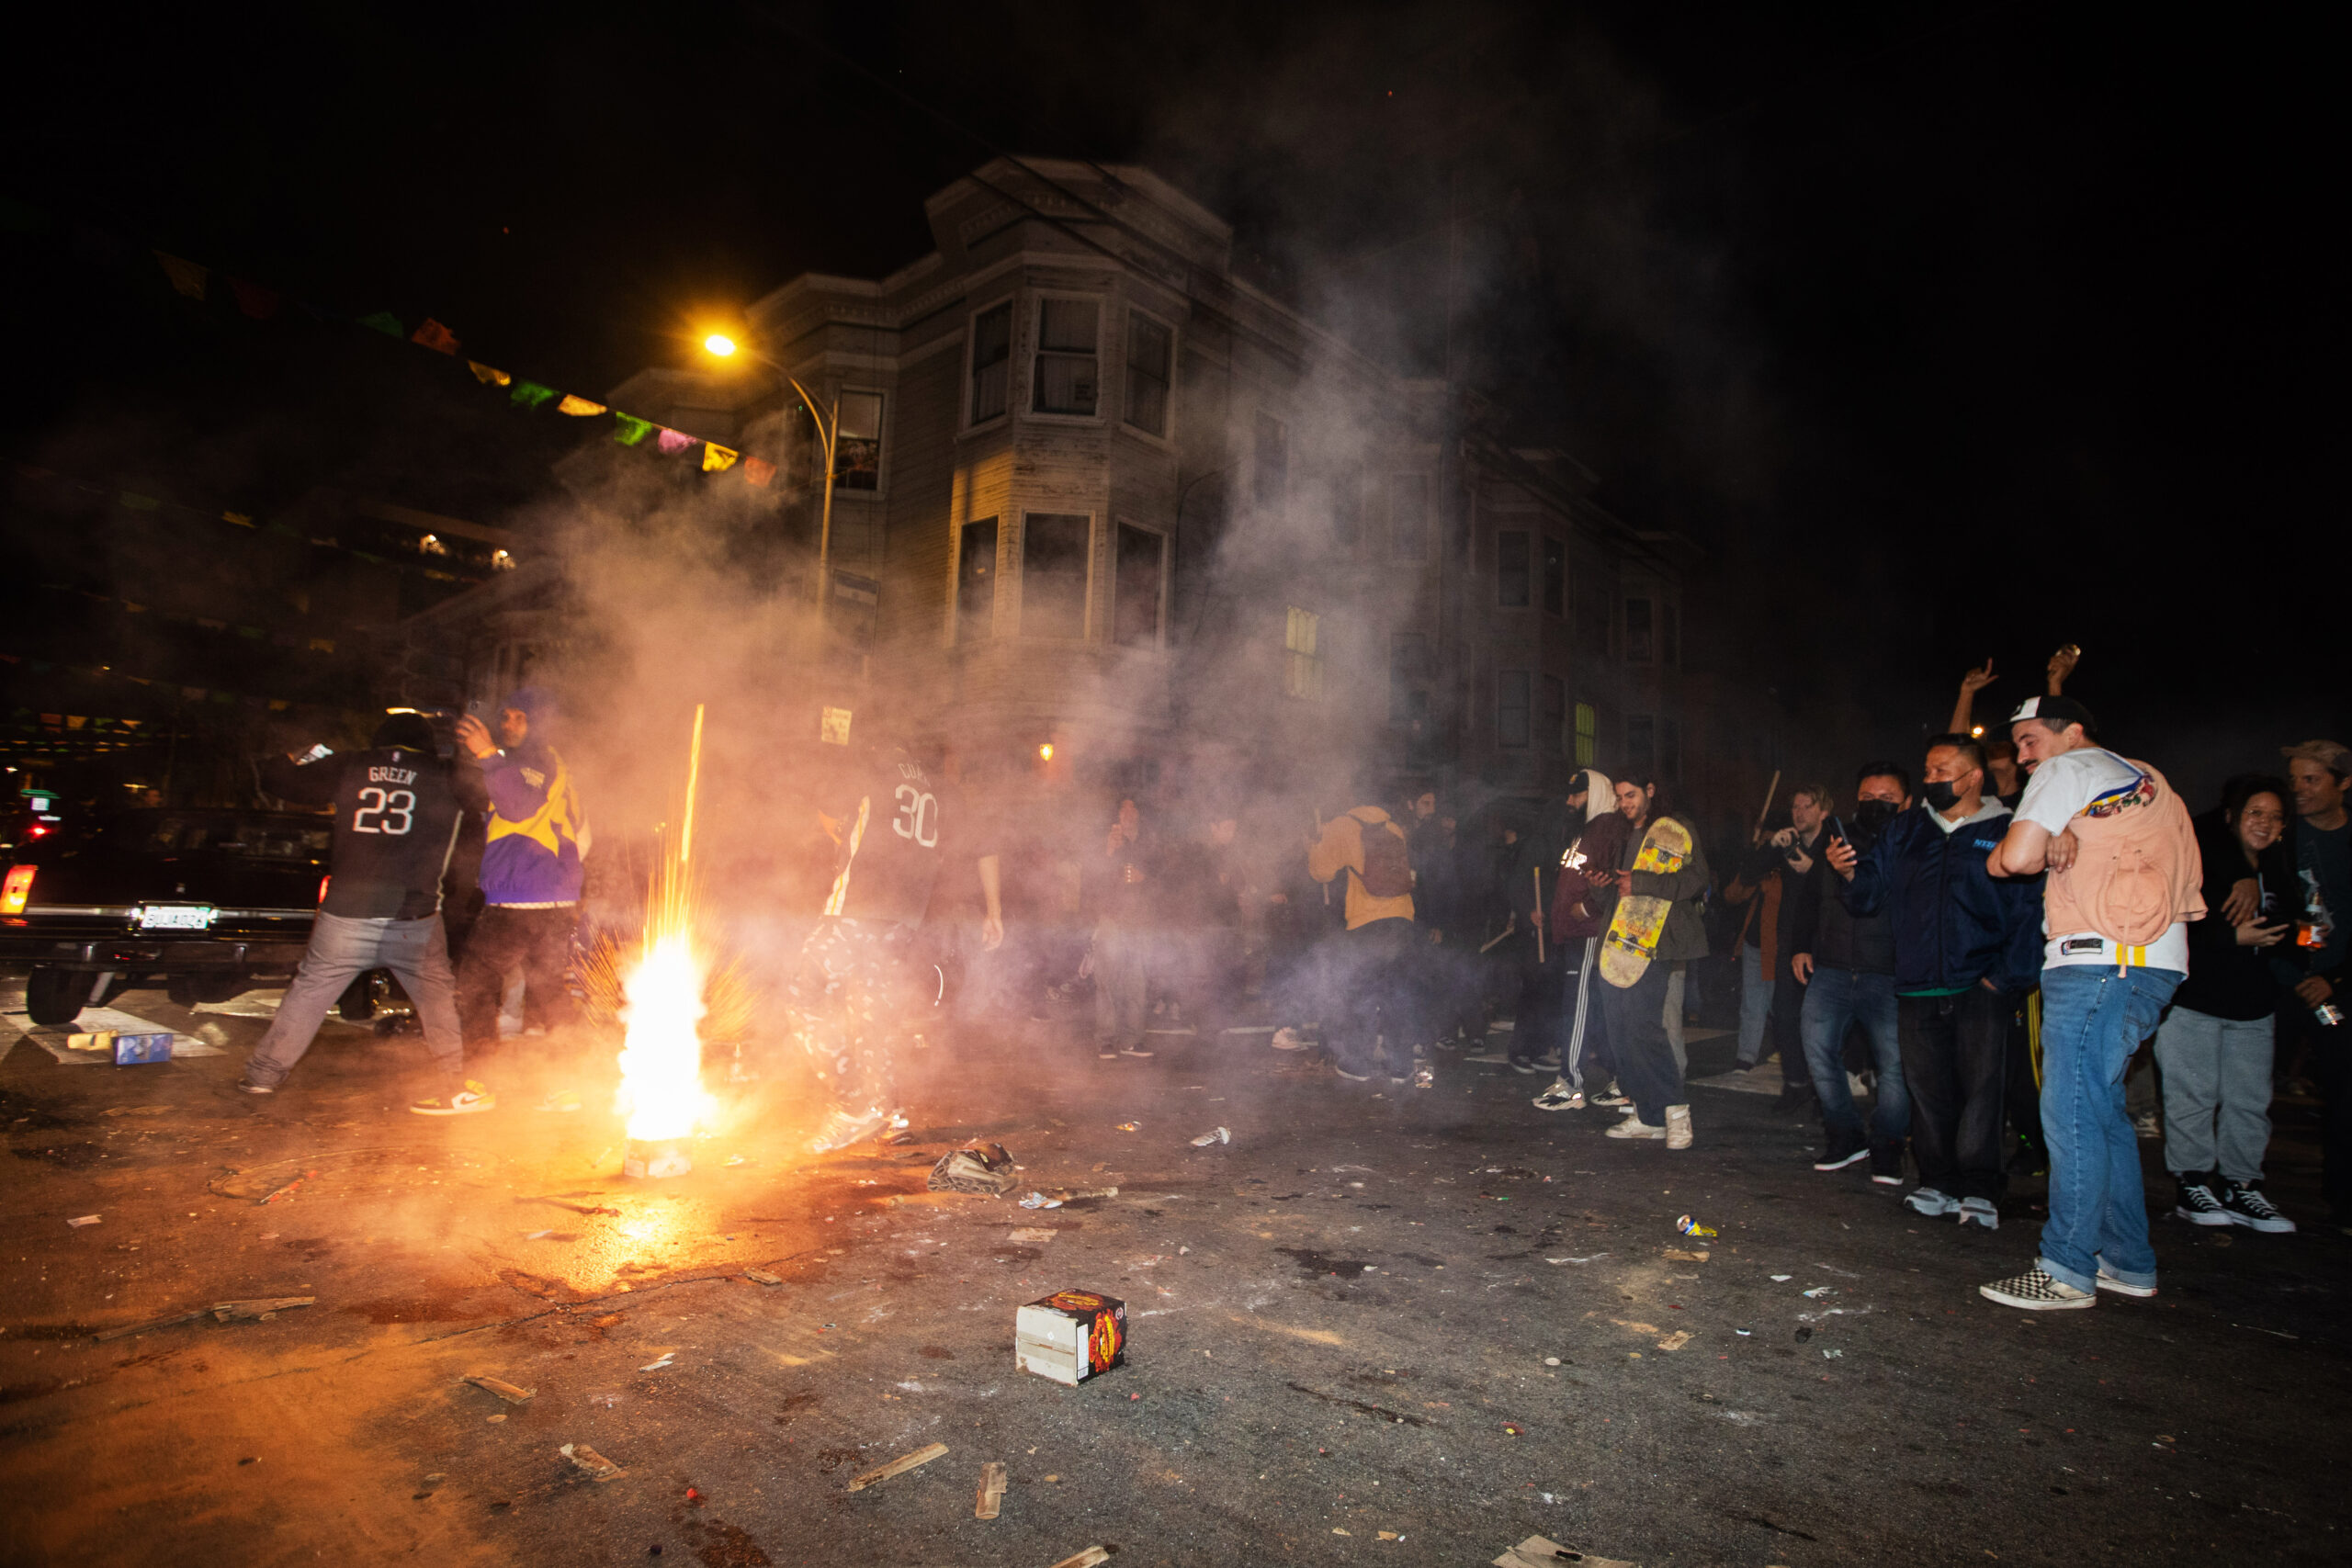 People light illegal fireworks at nighttime in a city street.